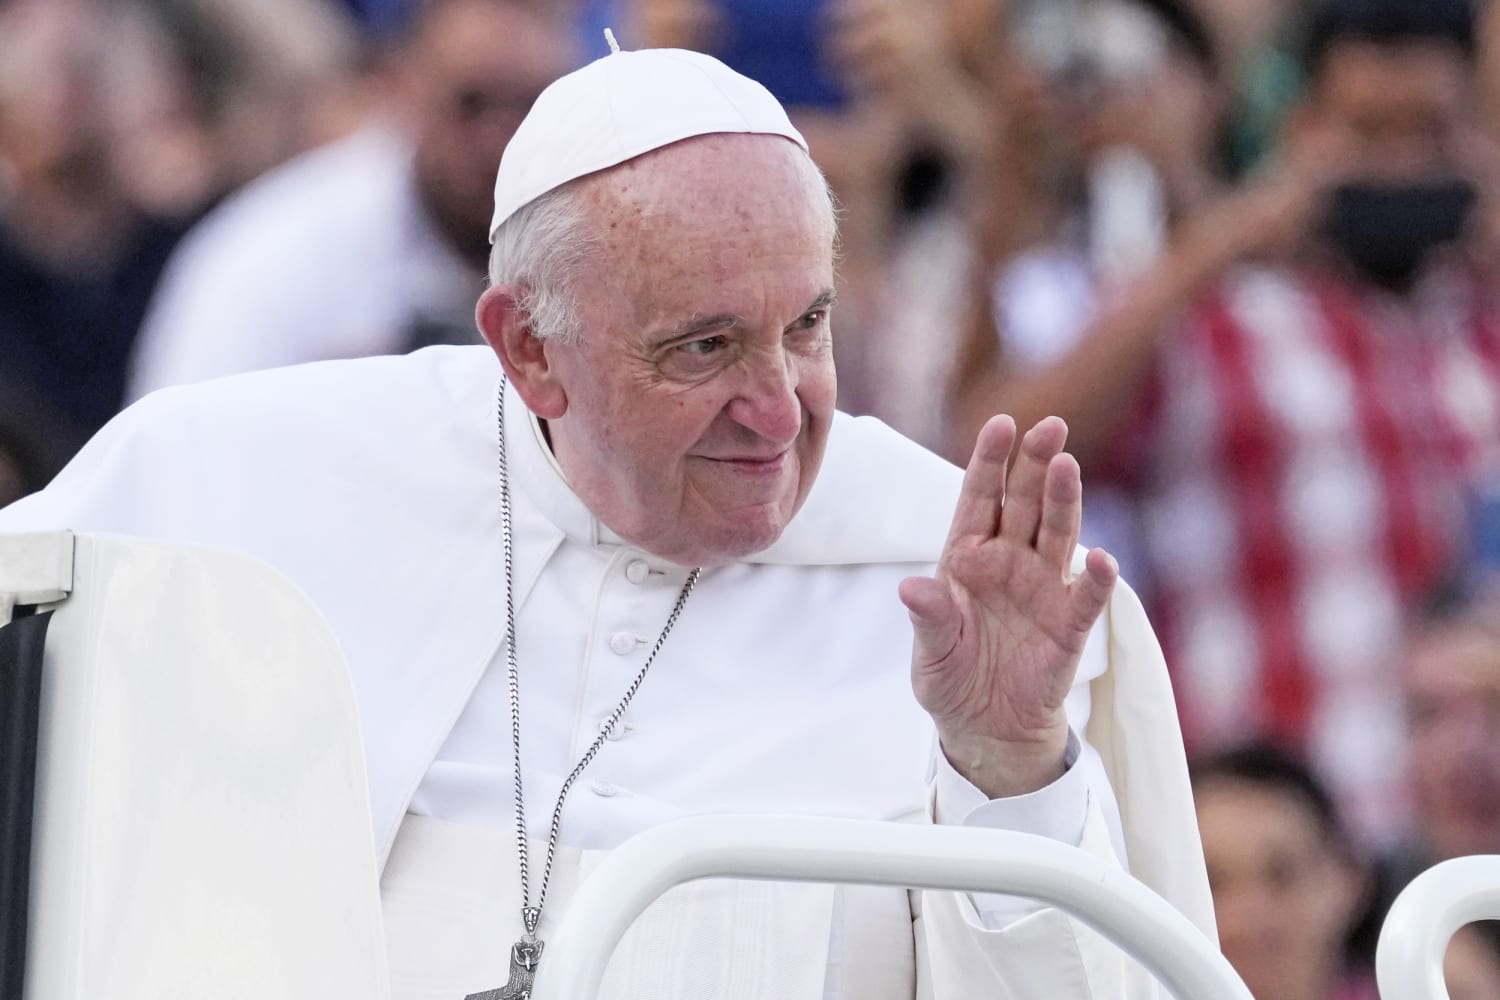 Pope Francis denies resignation rumors, says he hopes to visit Moscow and Kyiv